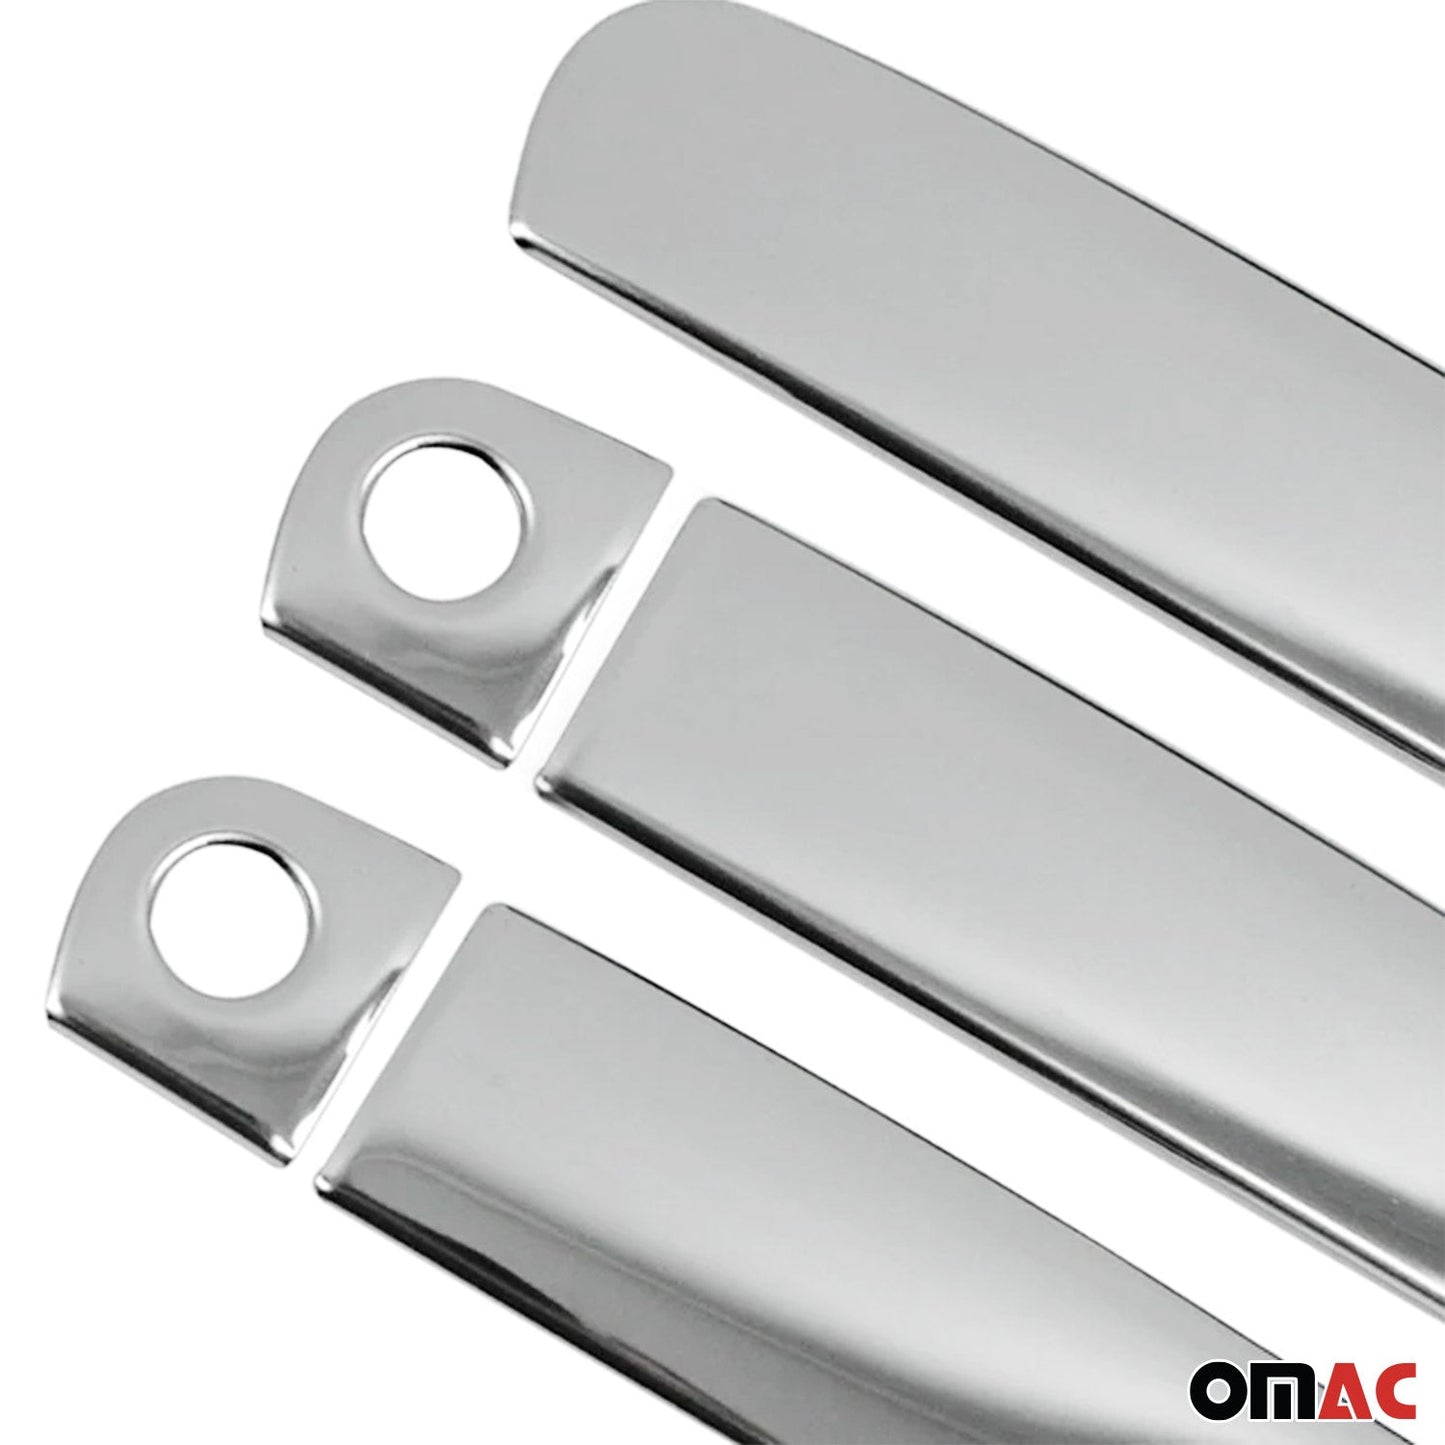 OMAC Car Door Handle Cover Protector for Audi A3 2008-2011 Steel Chrome 5 Pcs 1103046